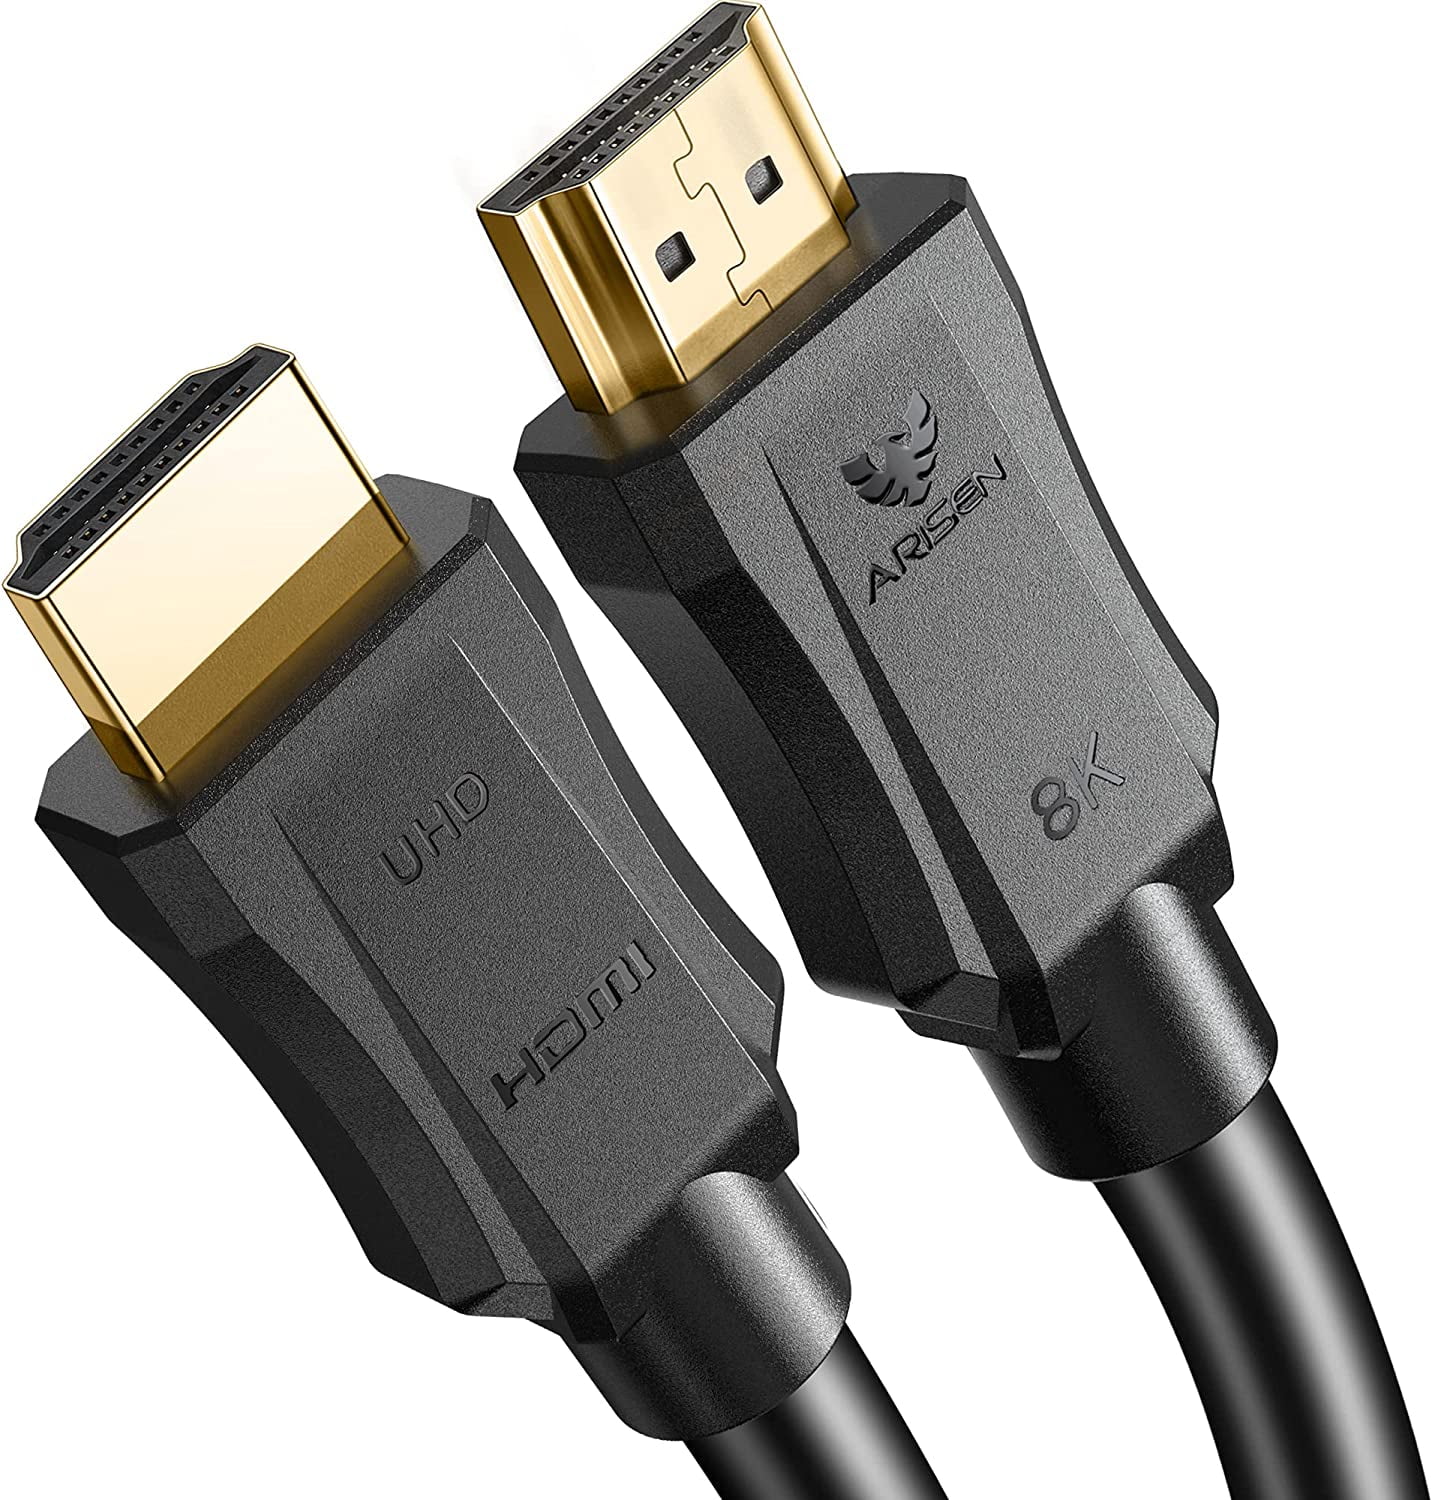 HDMI Cable 16ft, Long 48Gbps Ultra High Speed HDMI Certified, 4K120 8K@60Hz HDMI Cord, eARC HDR10 HDCP 2.2 2.3 Compatible with 3080 PS5 Xbox One X PS4 UHD